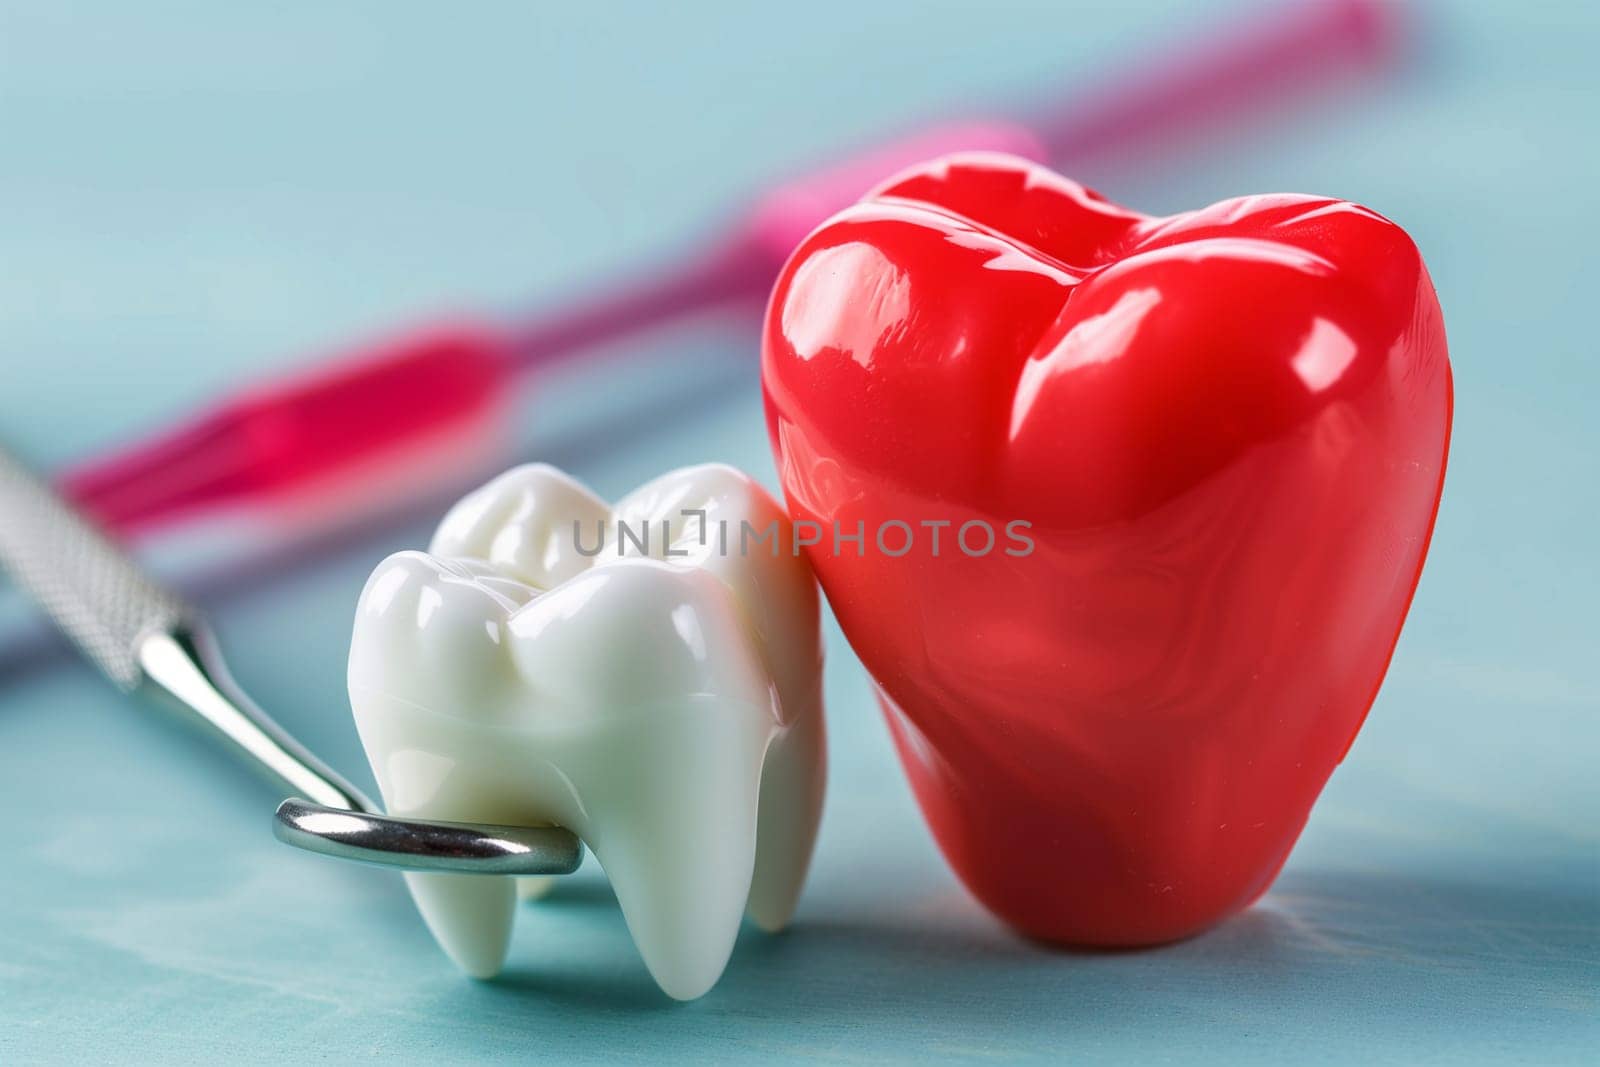 Heart-shaped Toothbrush Beside Tooth Heart by Sd28DimoN_1976